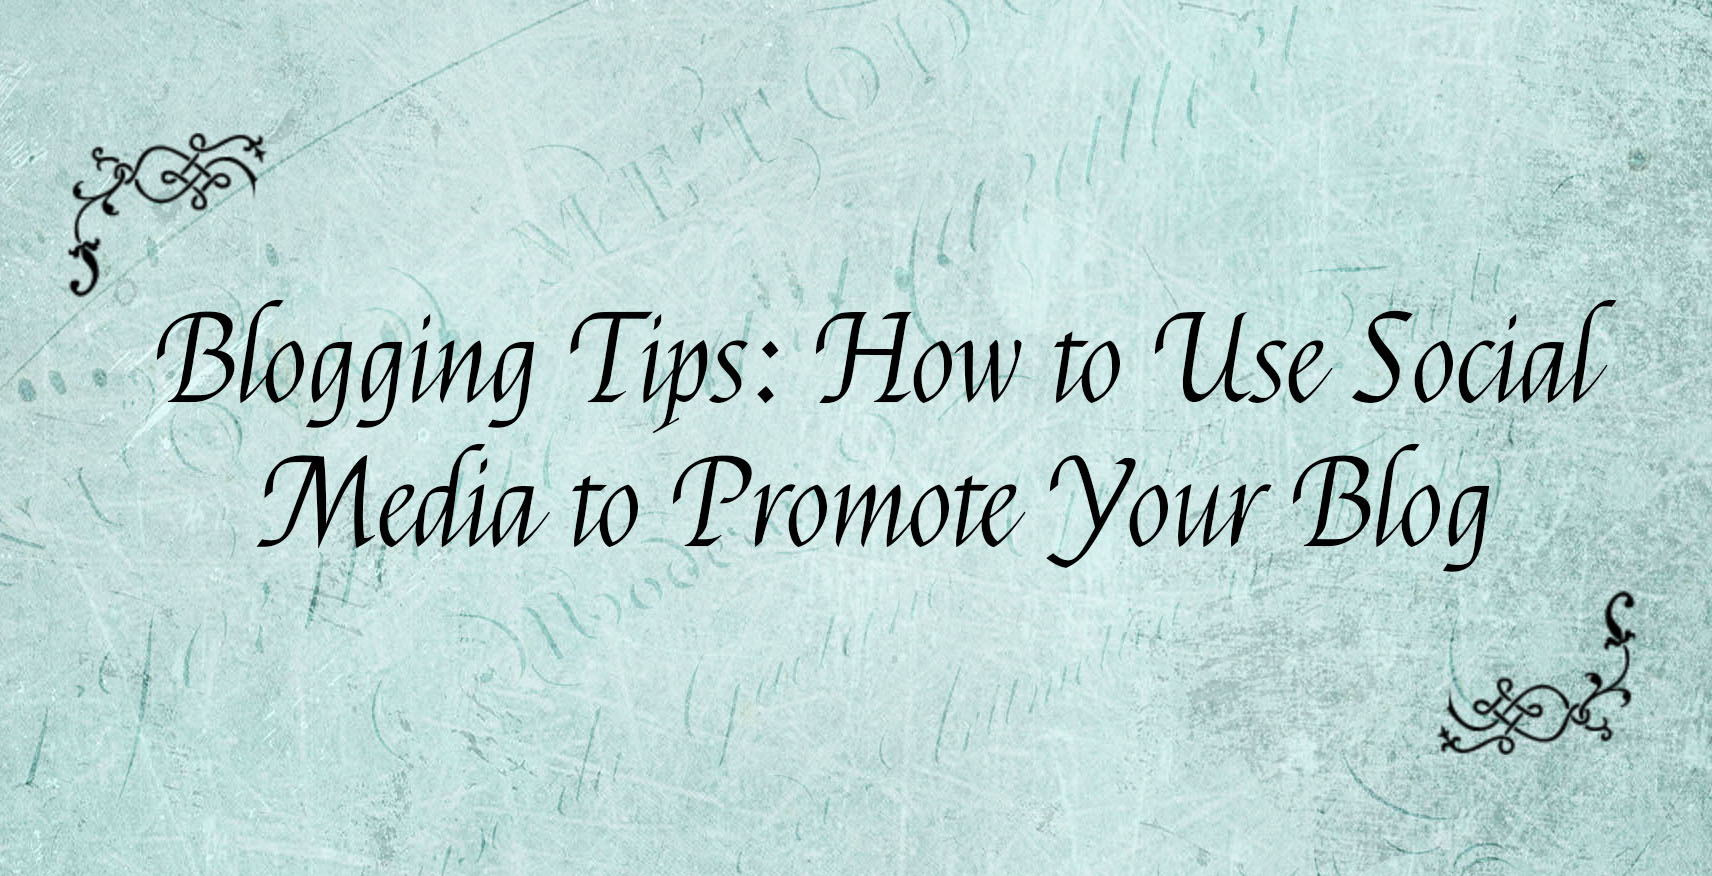 Blogging Tips: How to Use Social Media to Promote Your Blog